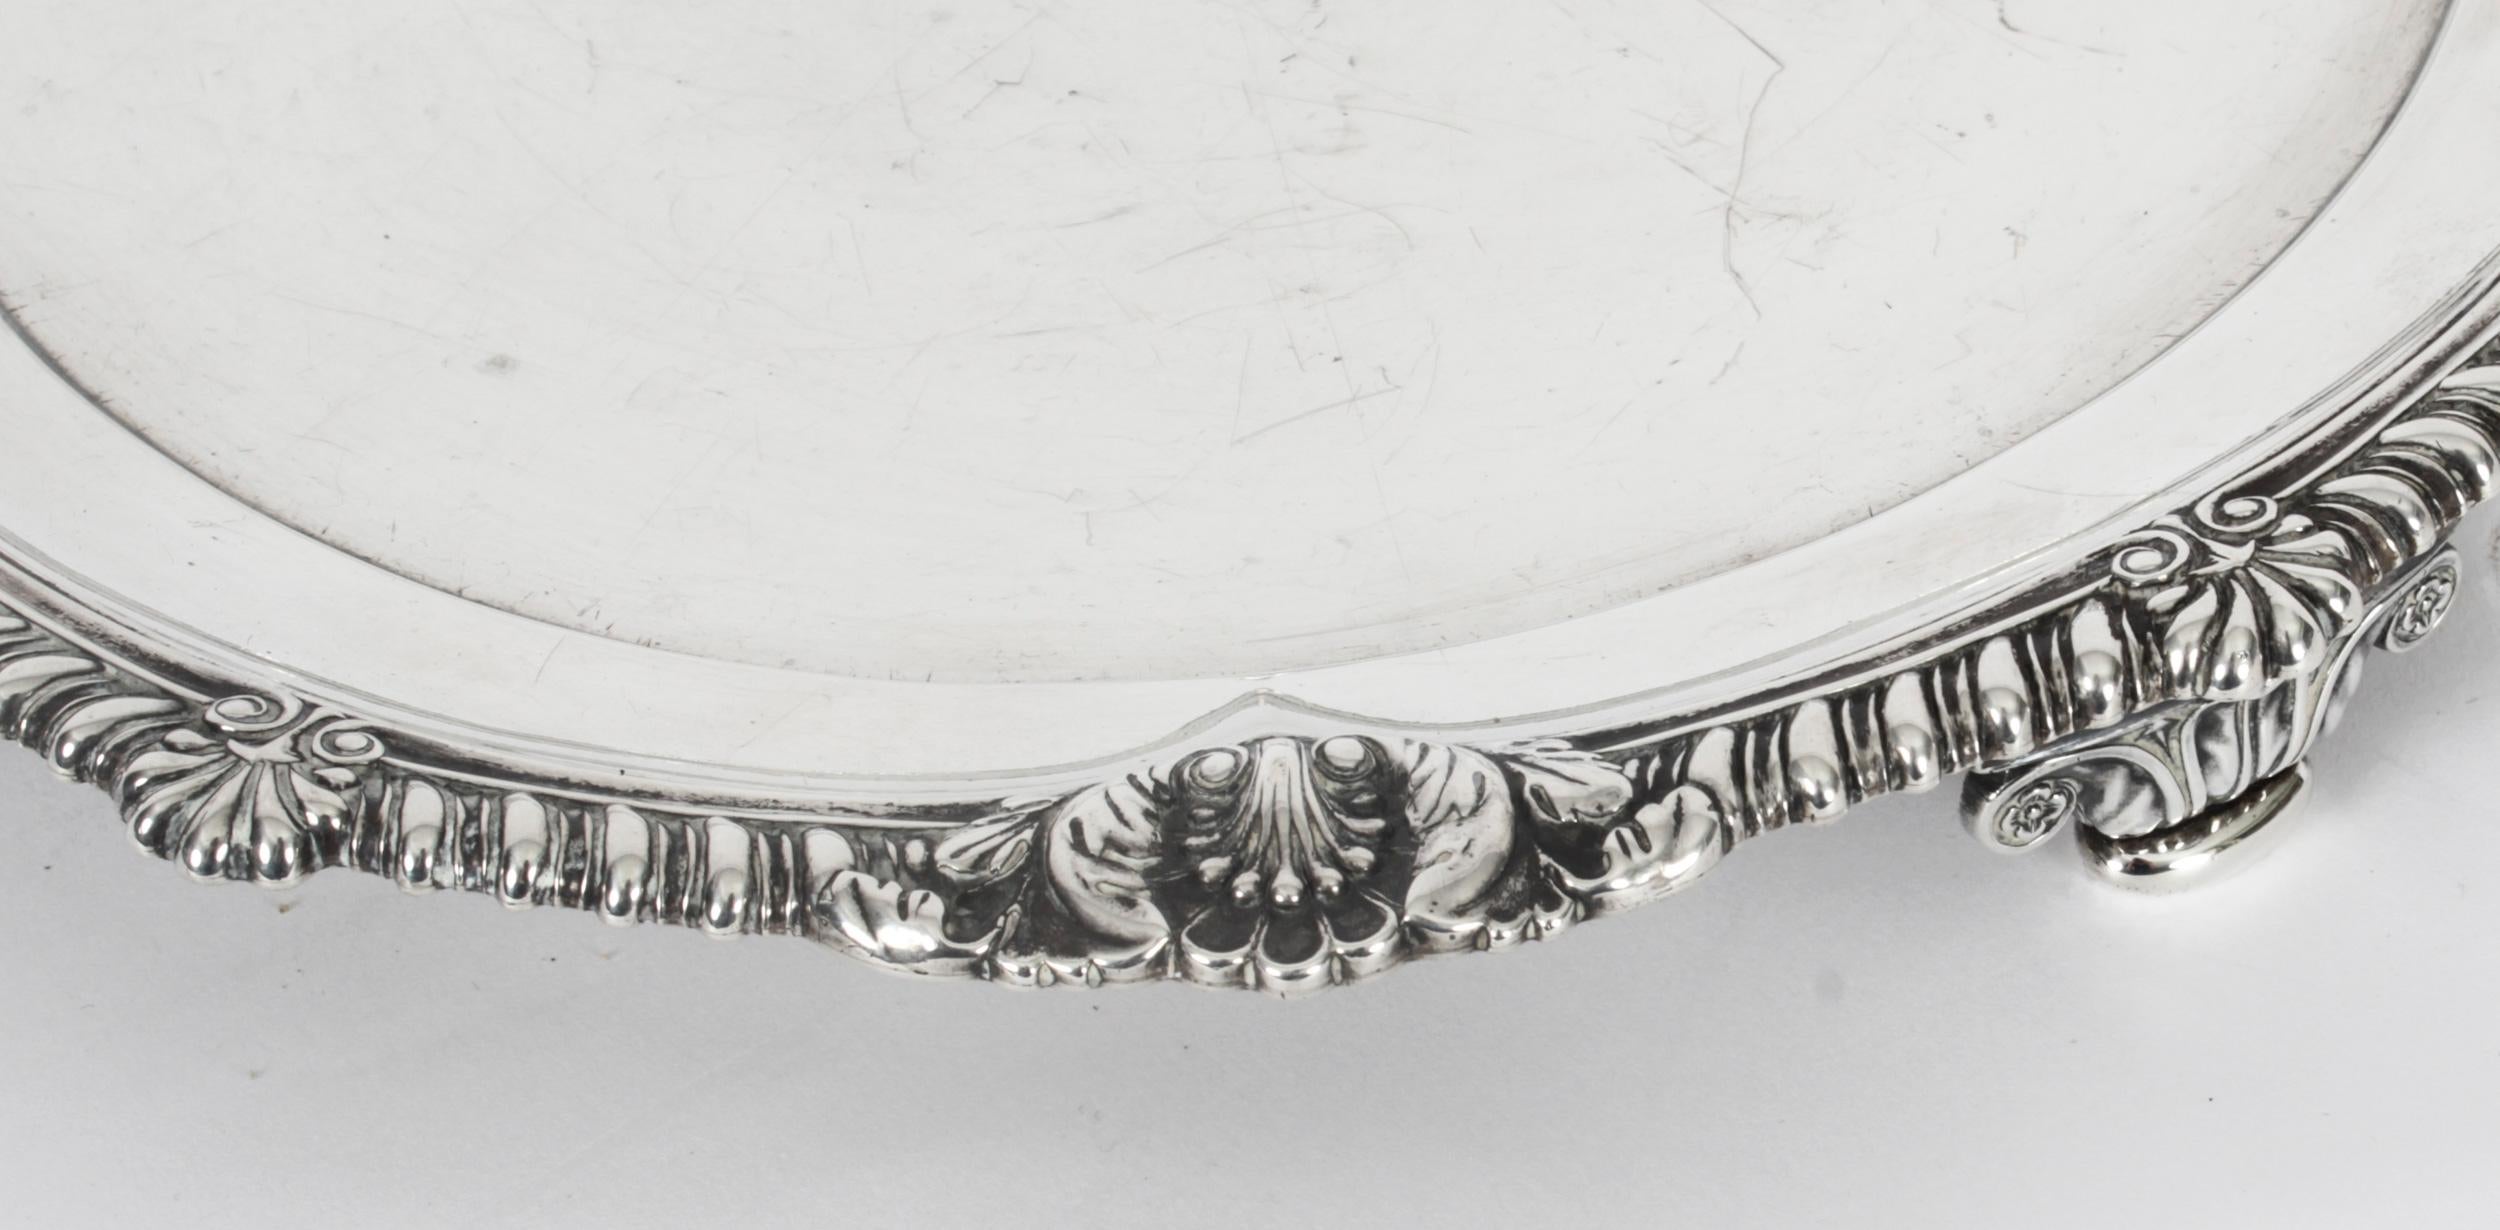 Antique George III Sterling Silver Salver by Paul Storr 1811 19th Century For Sale 2